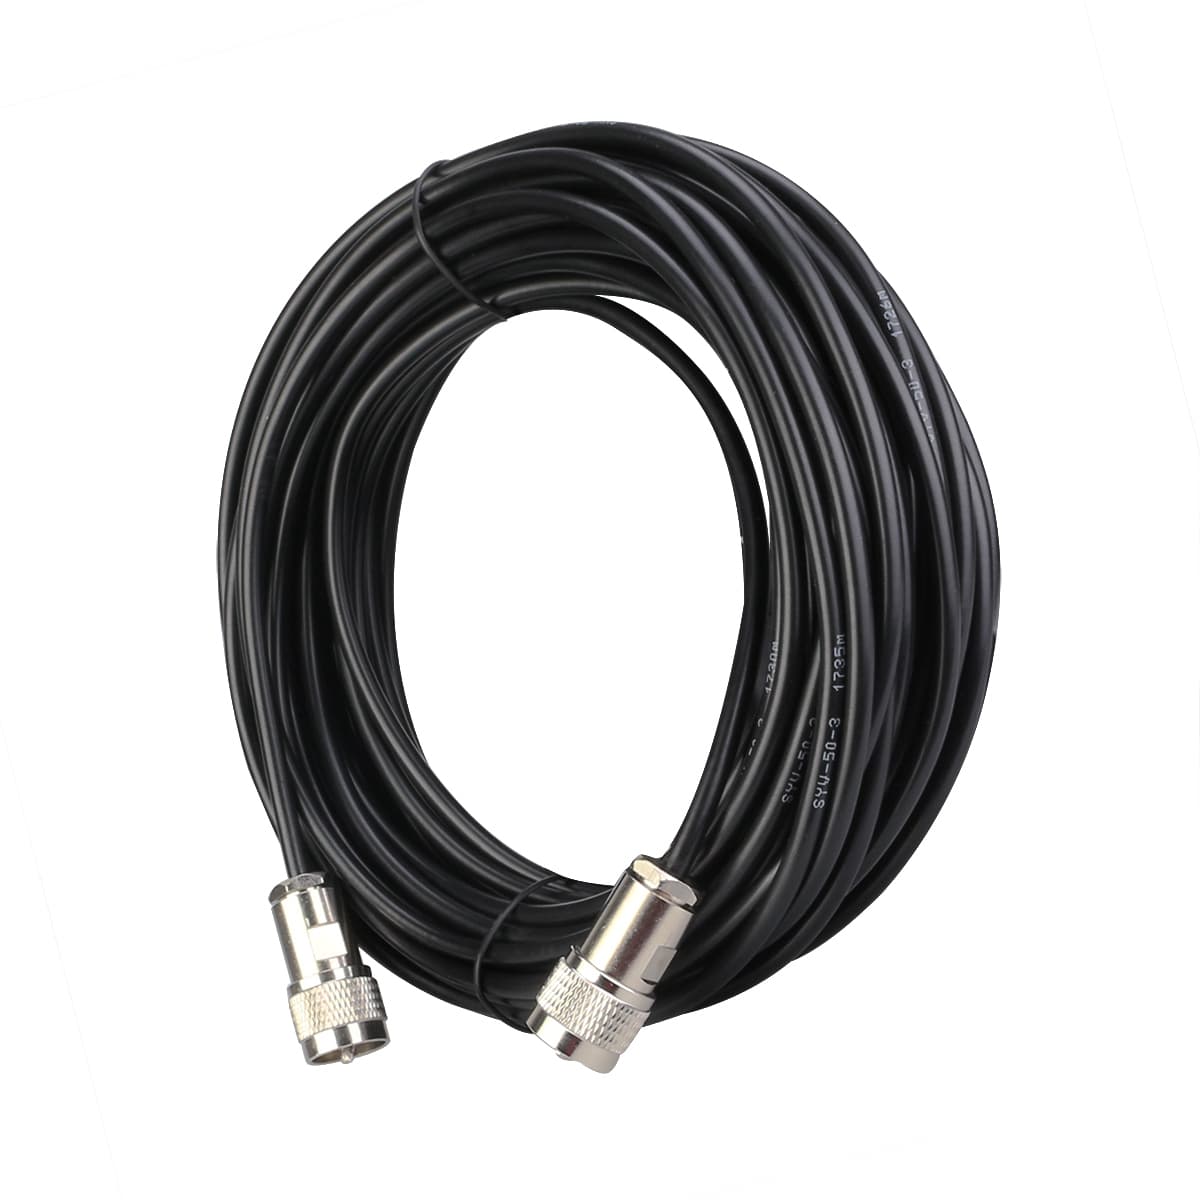 15 Meter Coaxial Cable for Repeater